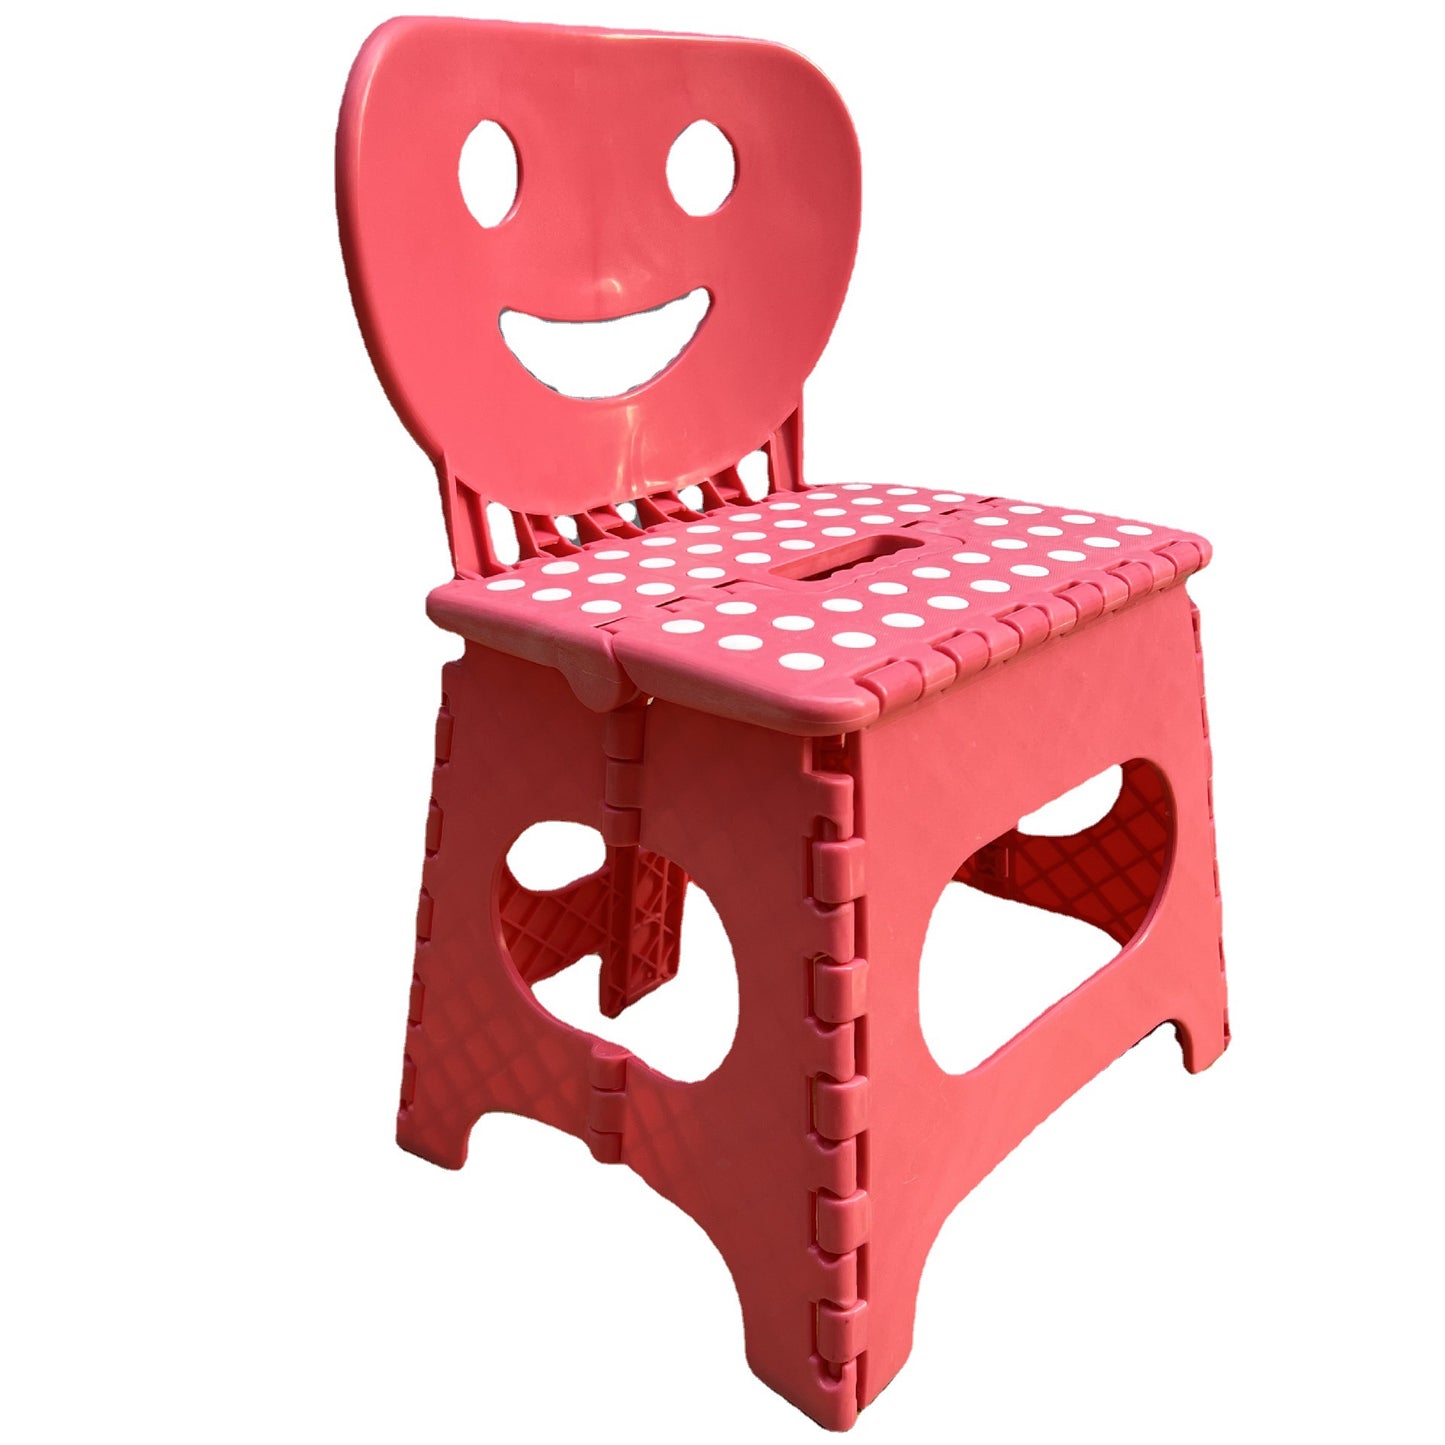 PickMeYA Folding Stool for Outdoor Activities - Portable and Compact Children's Chair, Sturdy for Adults & Safe for Kids, Opens Easily with One Flip, Children's Folding Backrest Chair